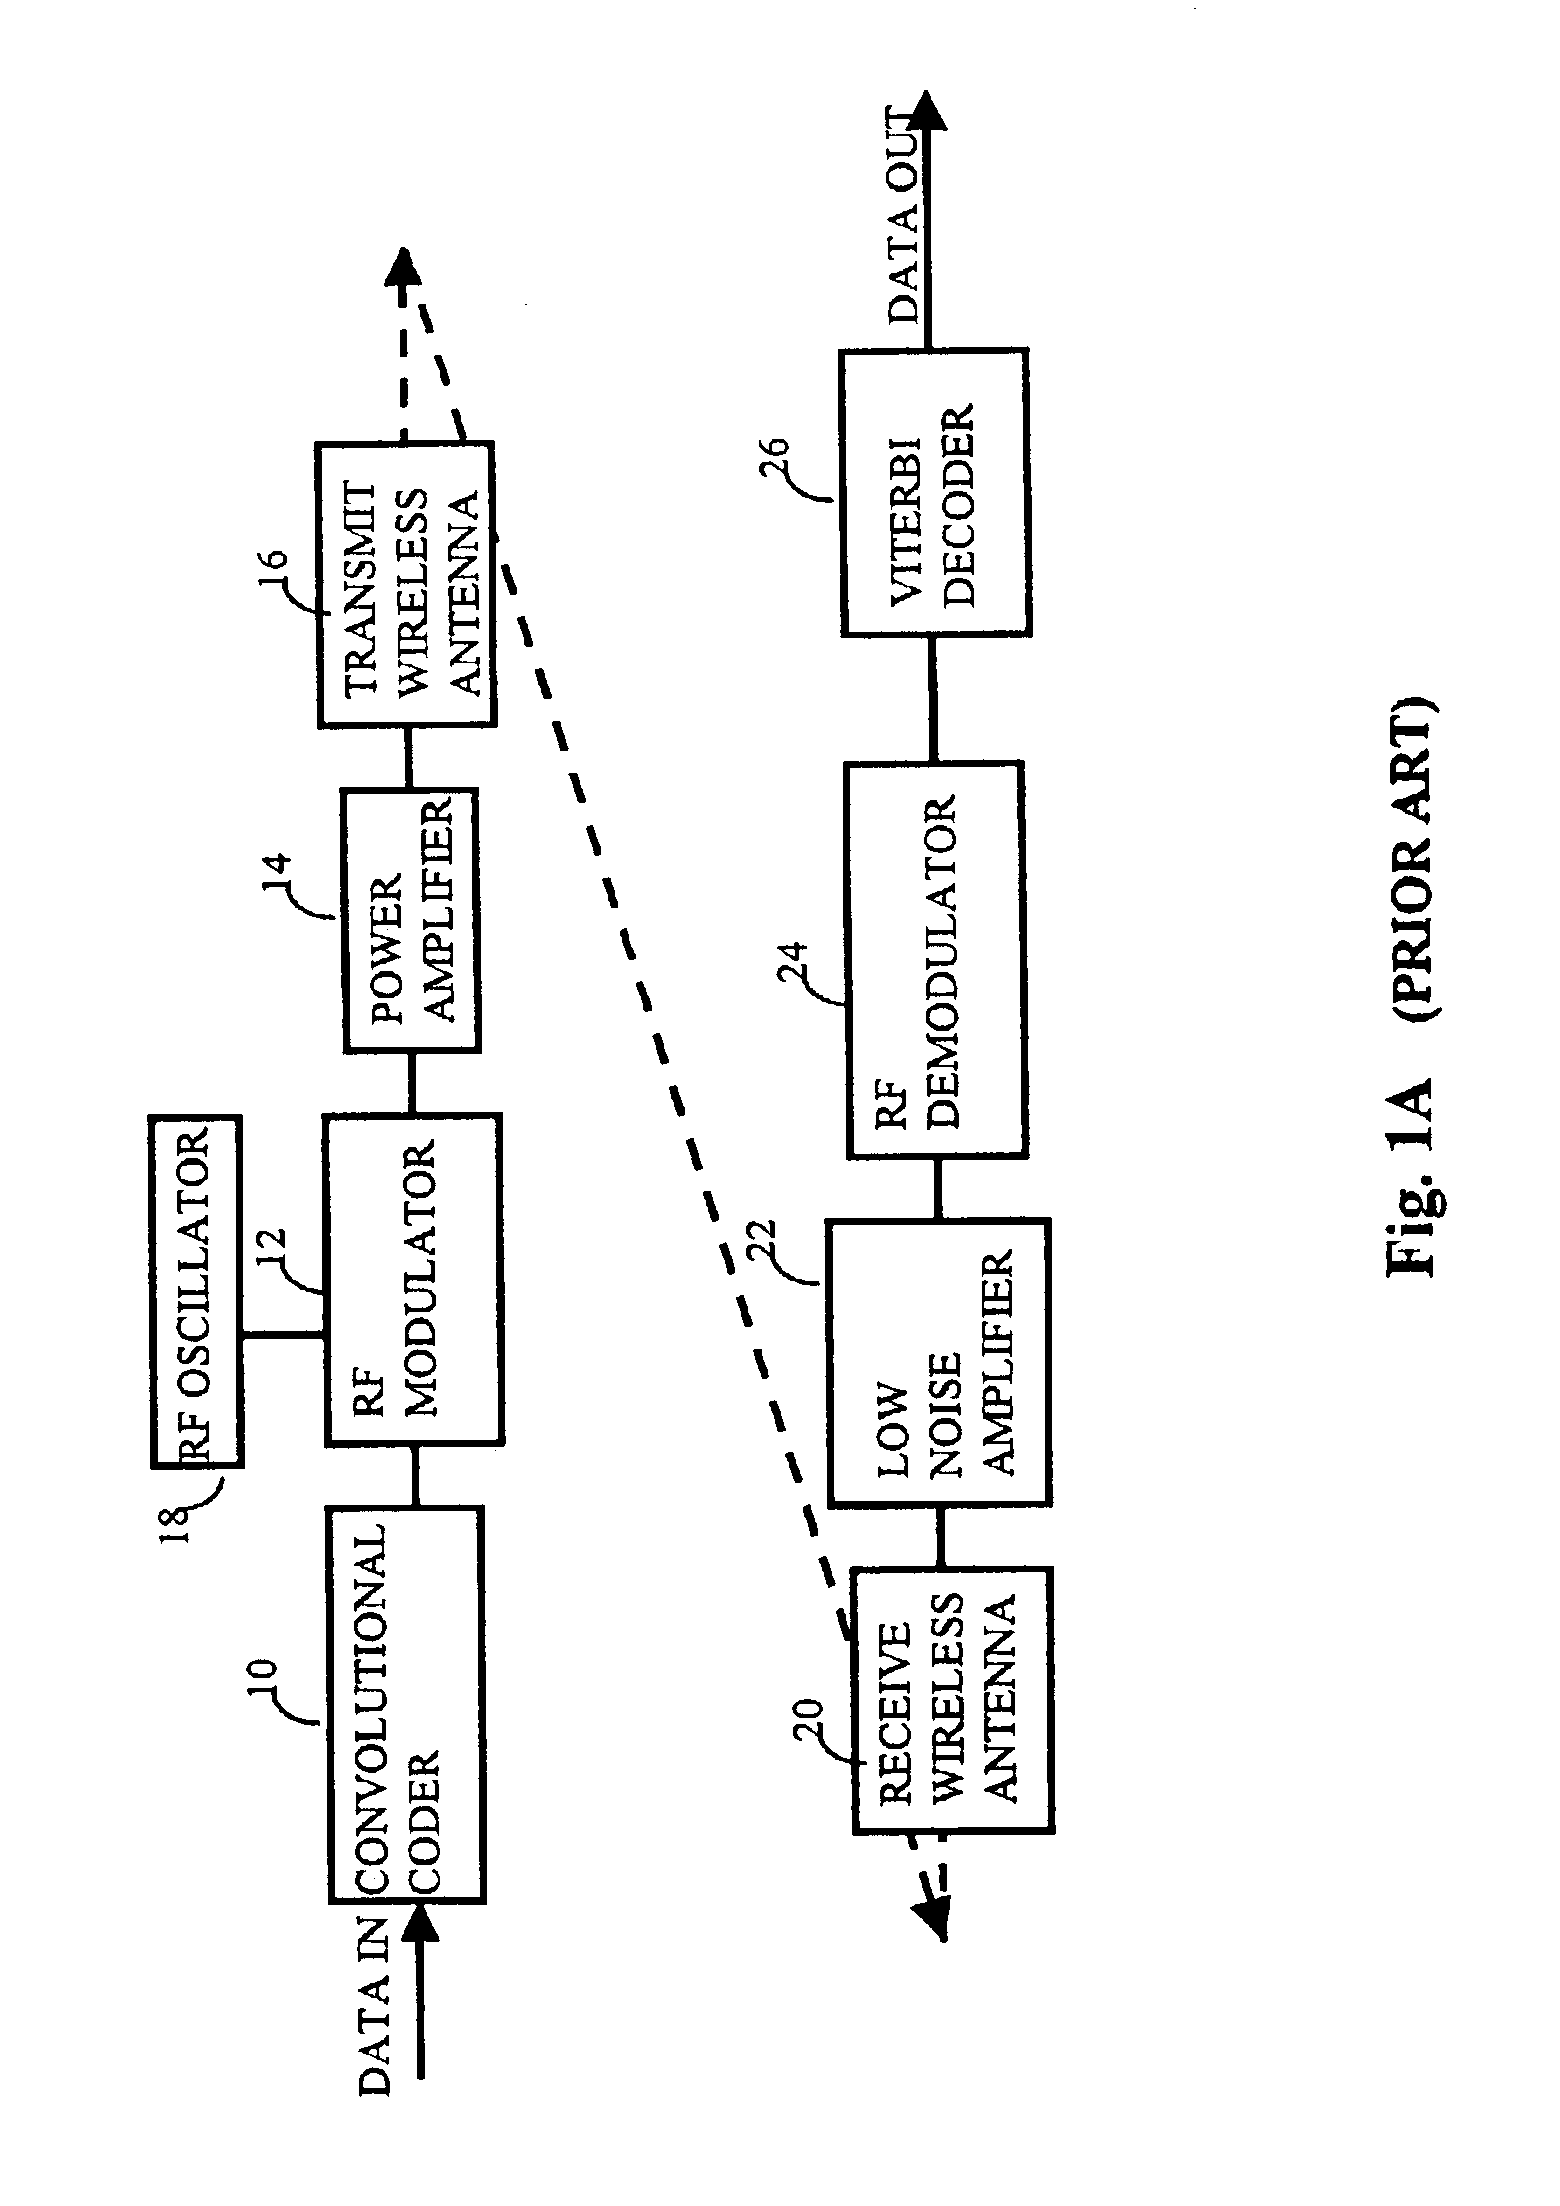 System and method for increasing bandwidth efficiency and throughput of a data transmission network